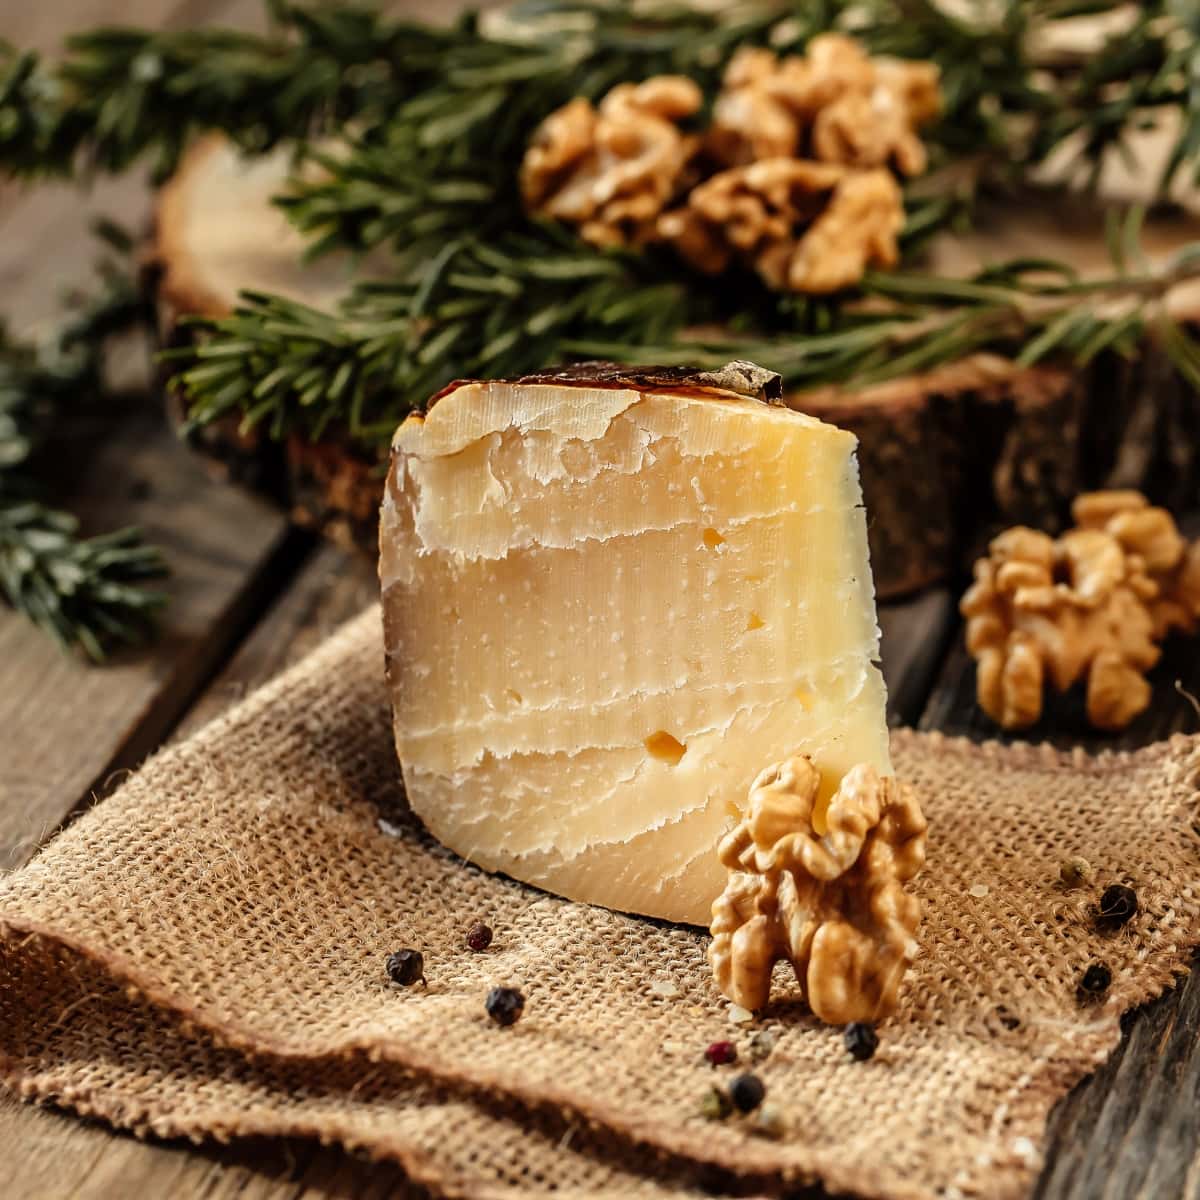 Montasio Cheese with Walnuts and Peppercorns on a Piece of Burlap Cloth and Pine Boughs in the Background